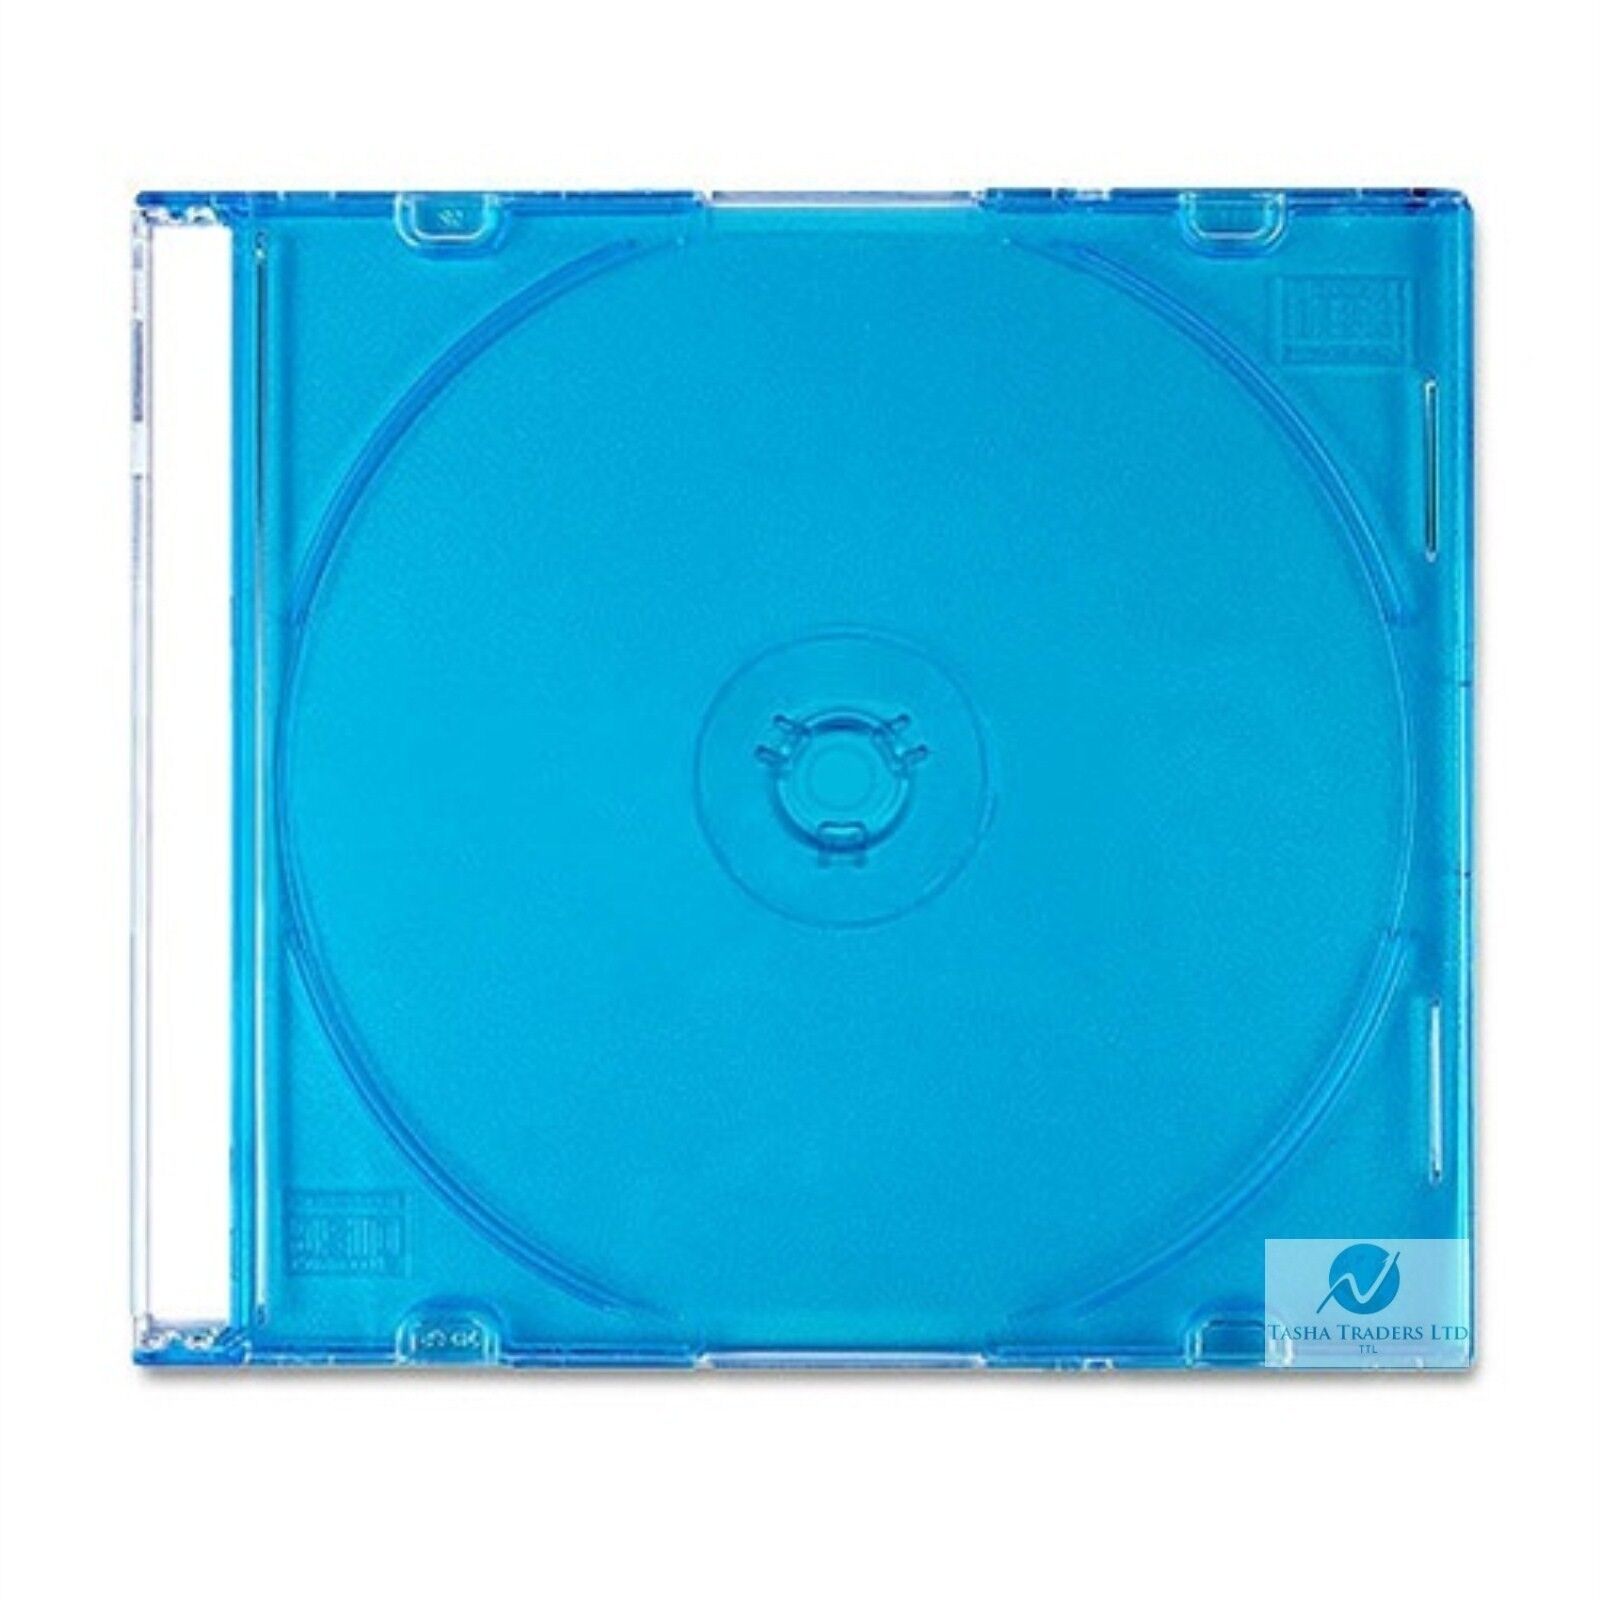 200 Single CD Jewel Case 5.2mm Spine Slim Blue Tray New Empty Replacement Cover 2022 Nowe artykuły